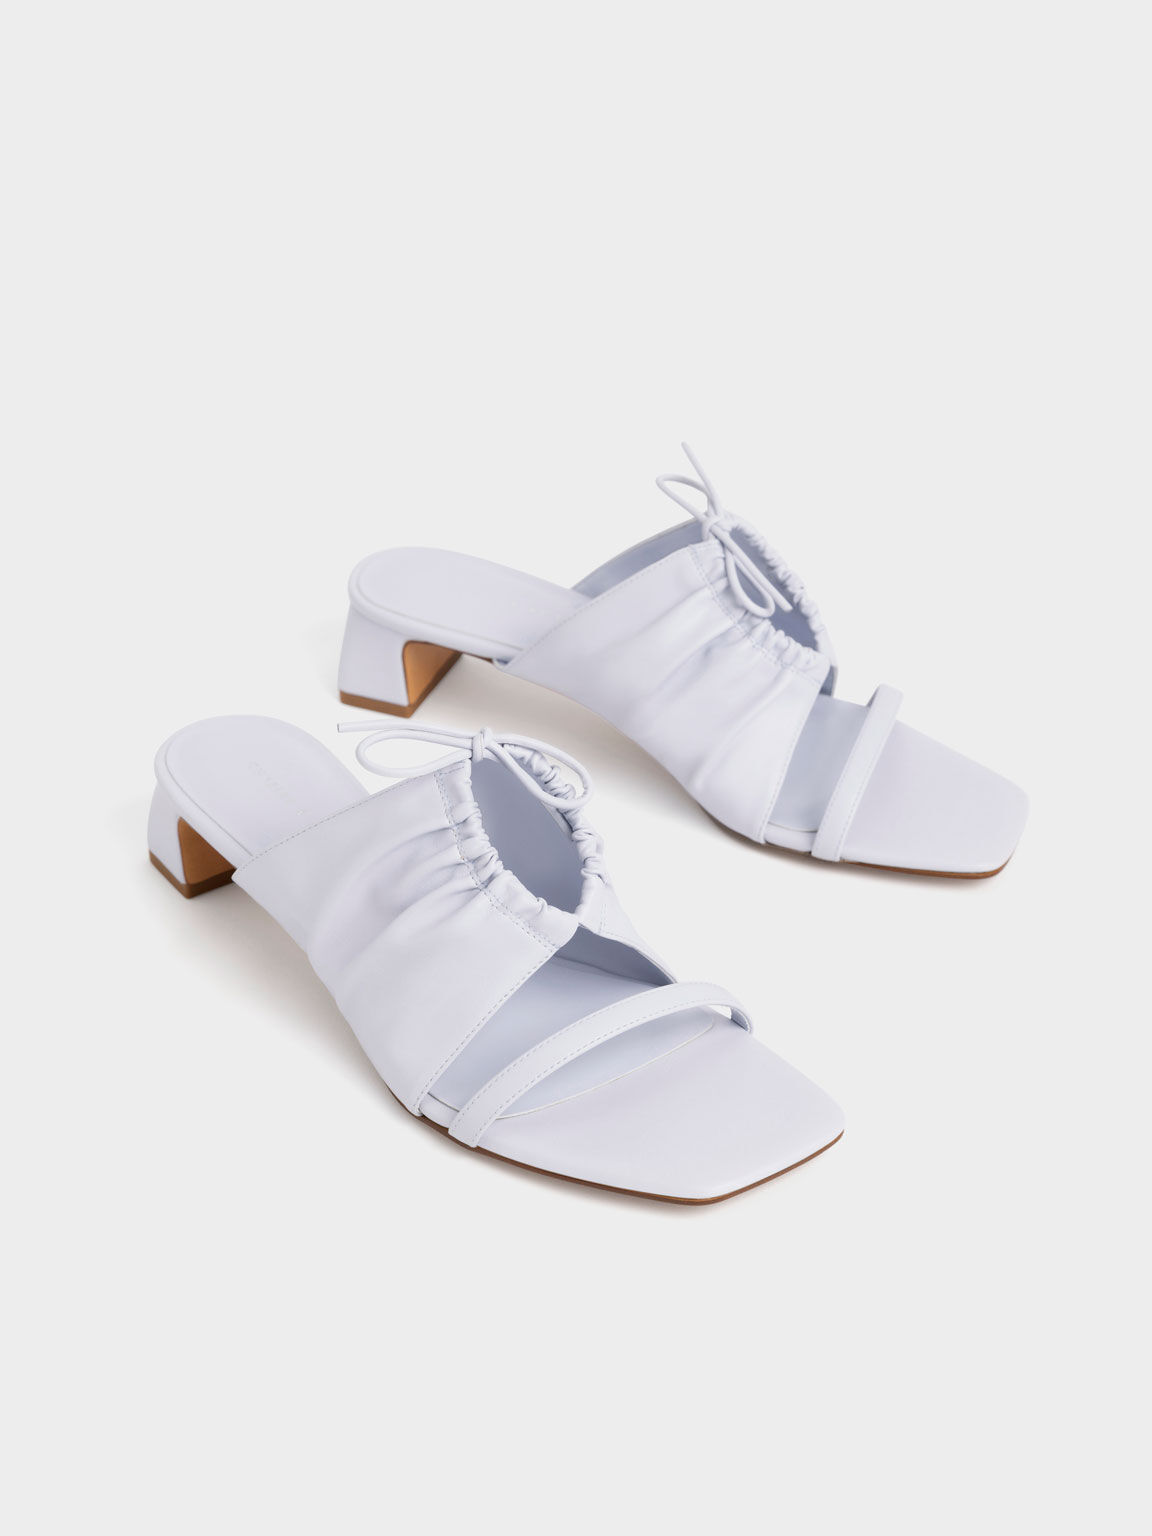 Bow-Tie Ruched Heeled Mules, Light Blue, hi-res